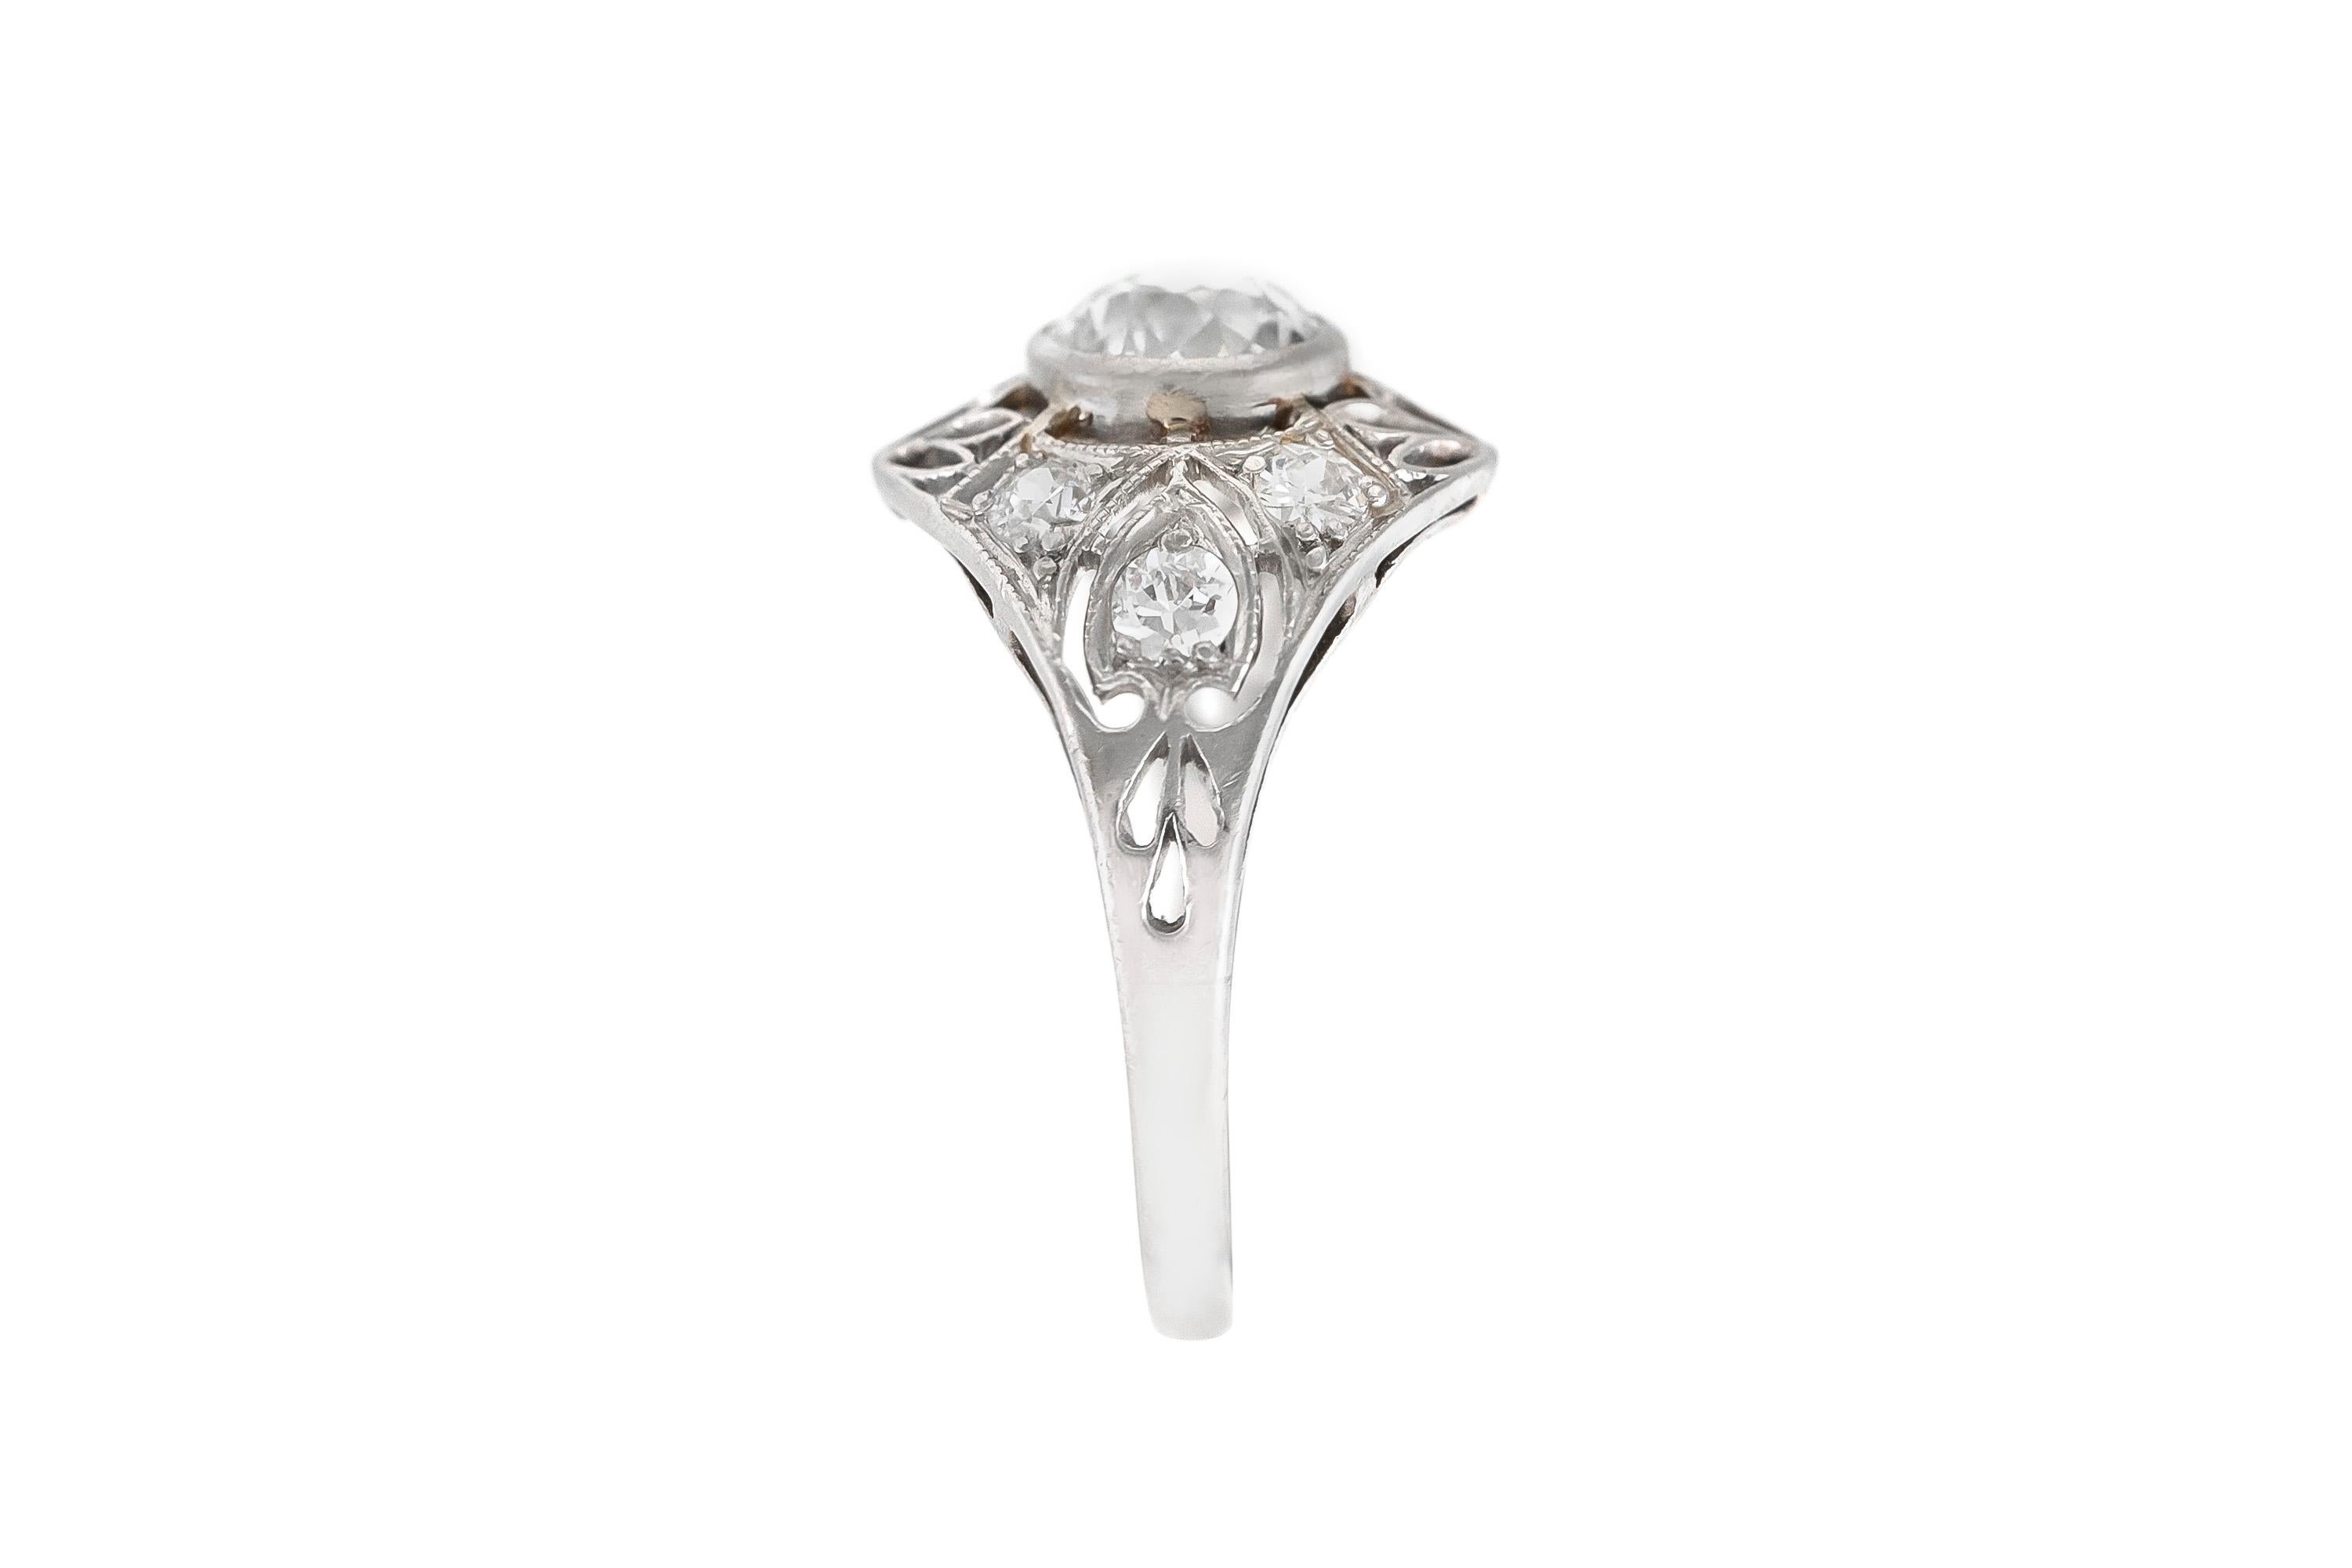 The ring is finely crafted in platinum with diamonds weighing approximately total of 1.00 center diamond and 0.40 more around diamonds .
Size 7.00 ( easy to resize)
Circa 1900.